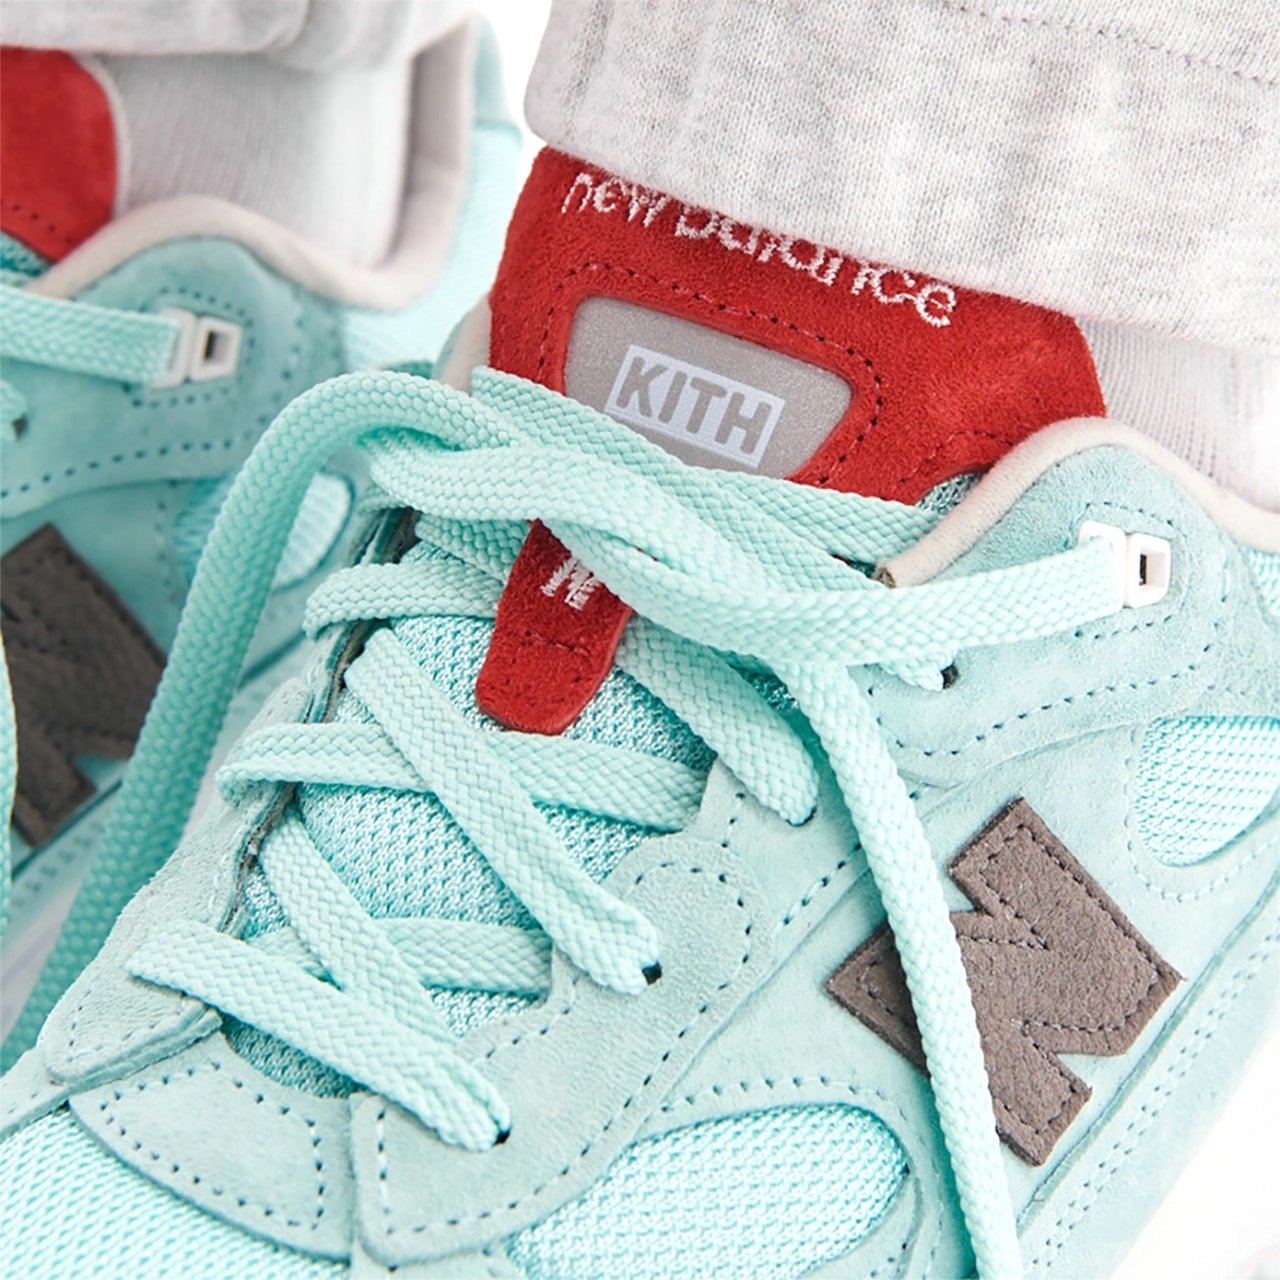 ronnie fied new balance 992 kithmas release info light blue red white pricing photos buying guide store list